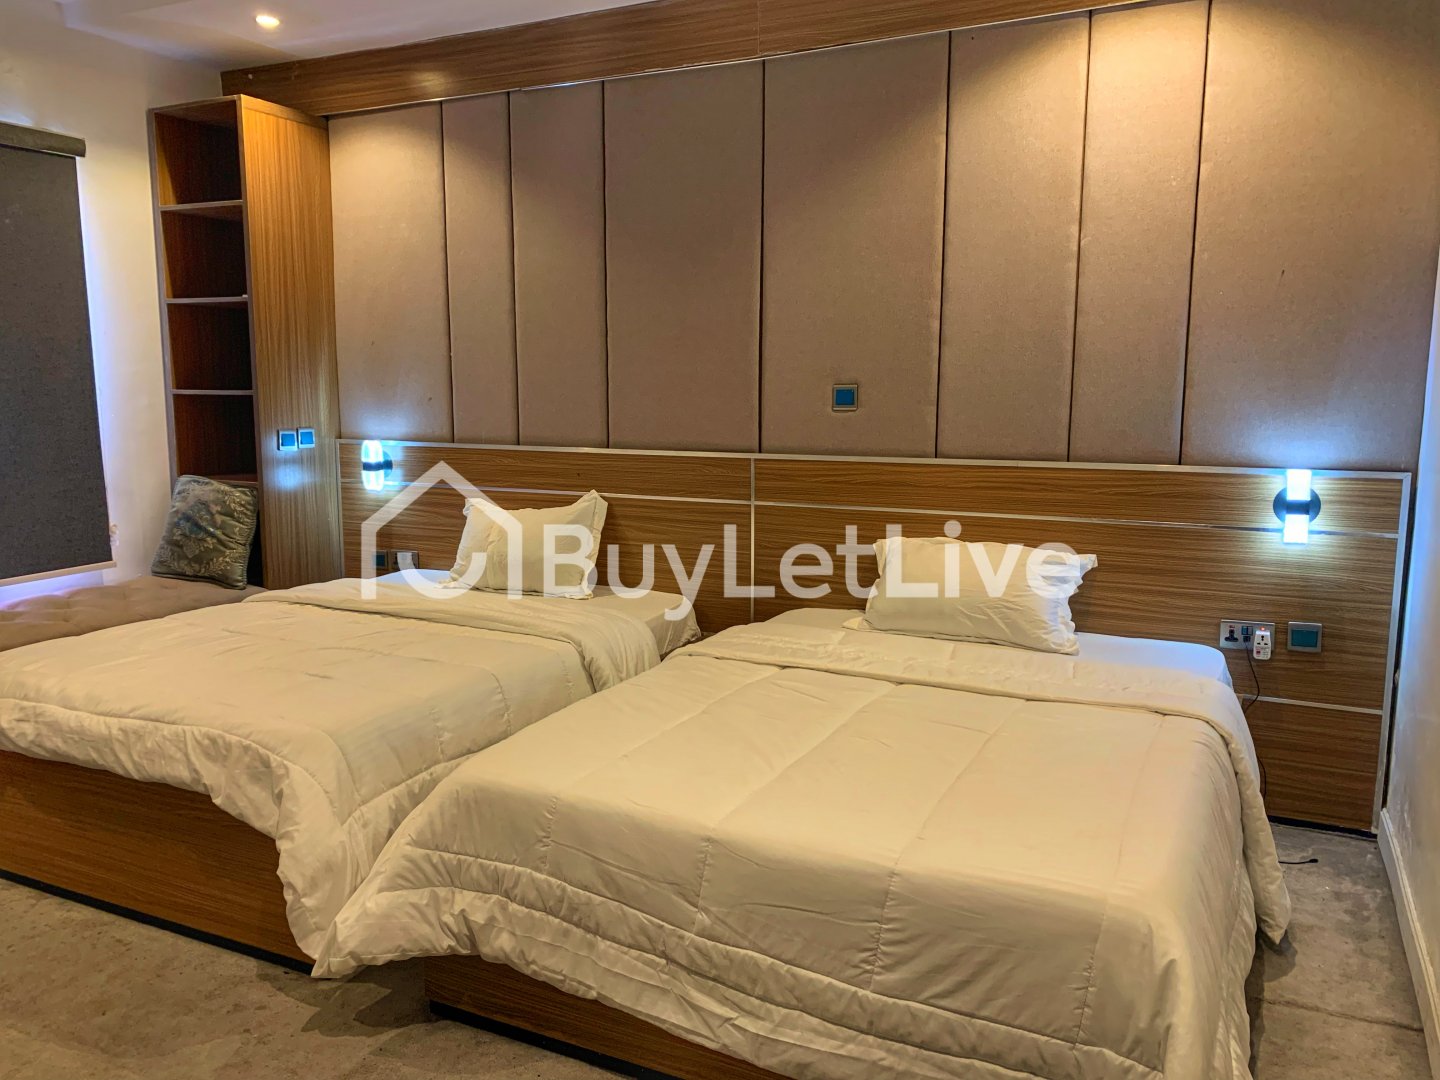 3 bedrooms Flat / Apartment for shortlet at Osapa london